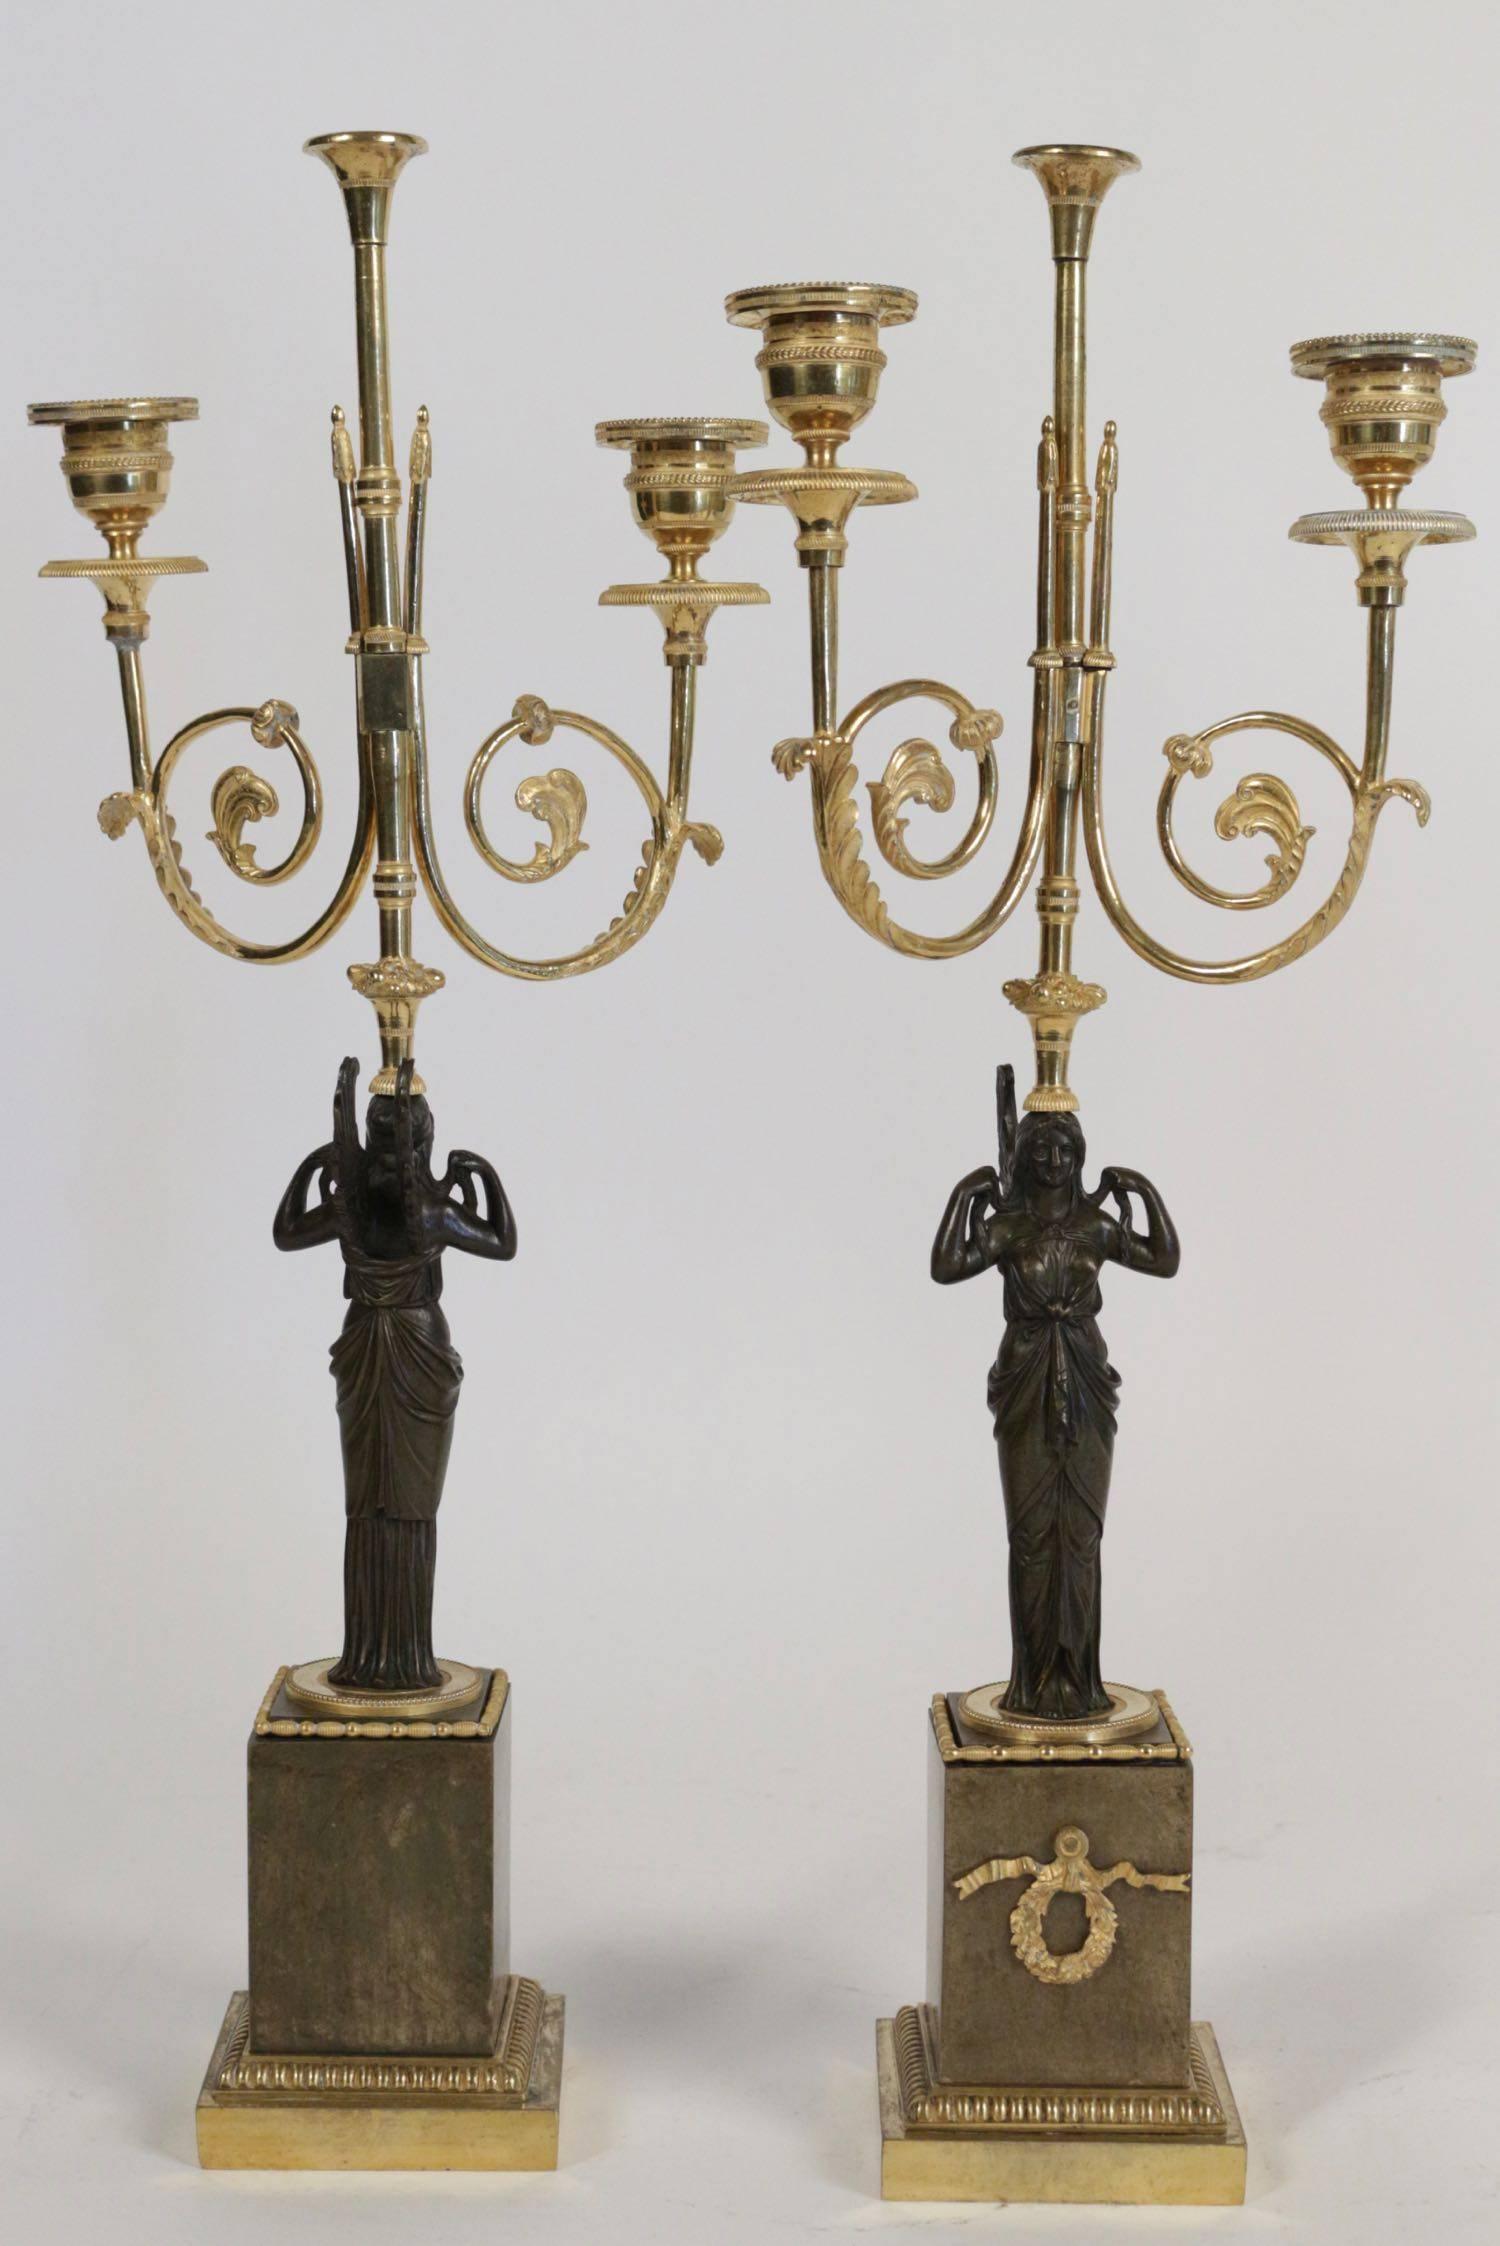 Louis XVI Pair of 18th Century Bronze Candlesticks in Gold Gilt with Marble Base